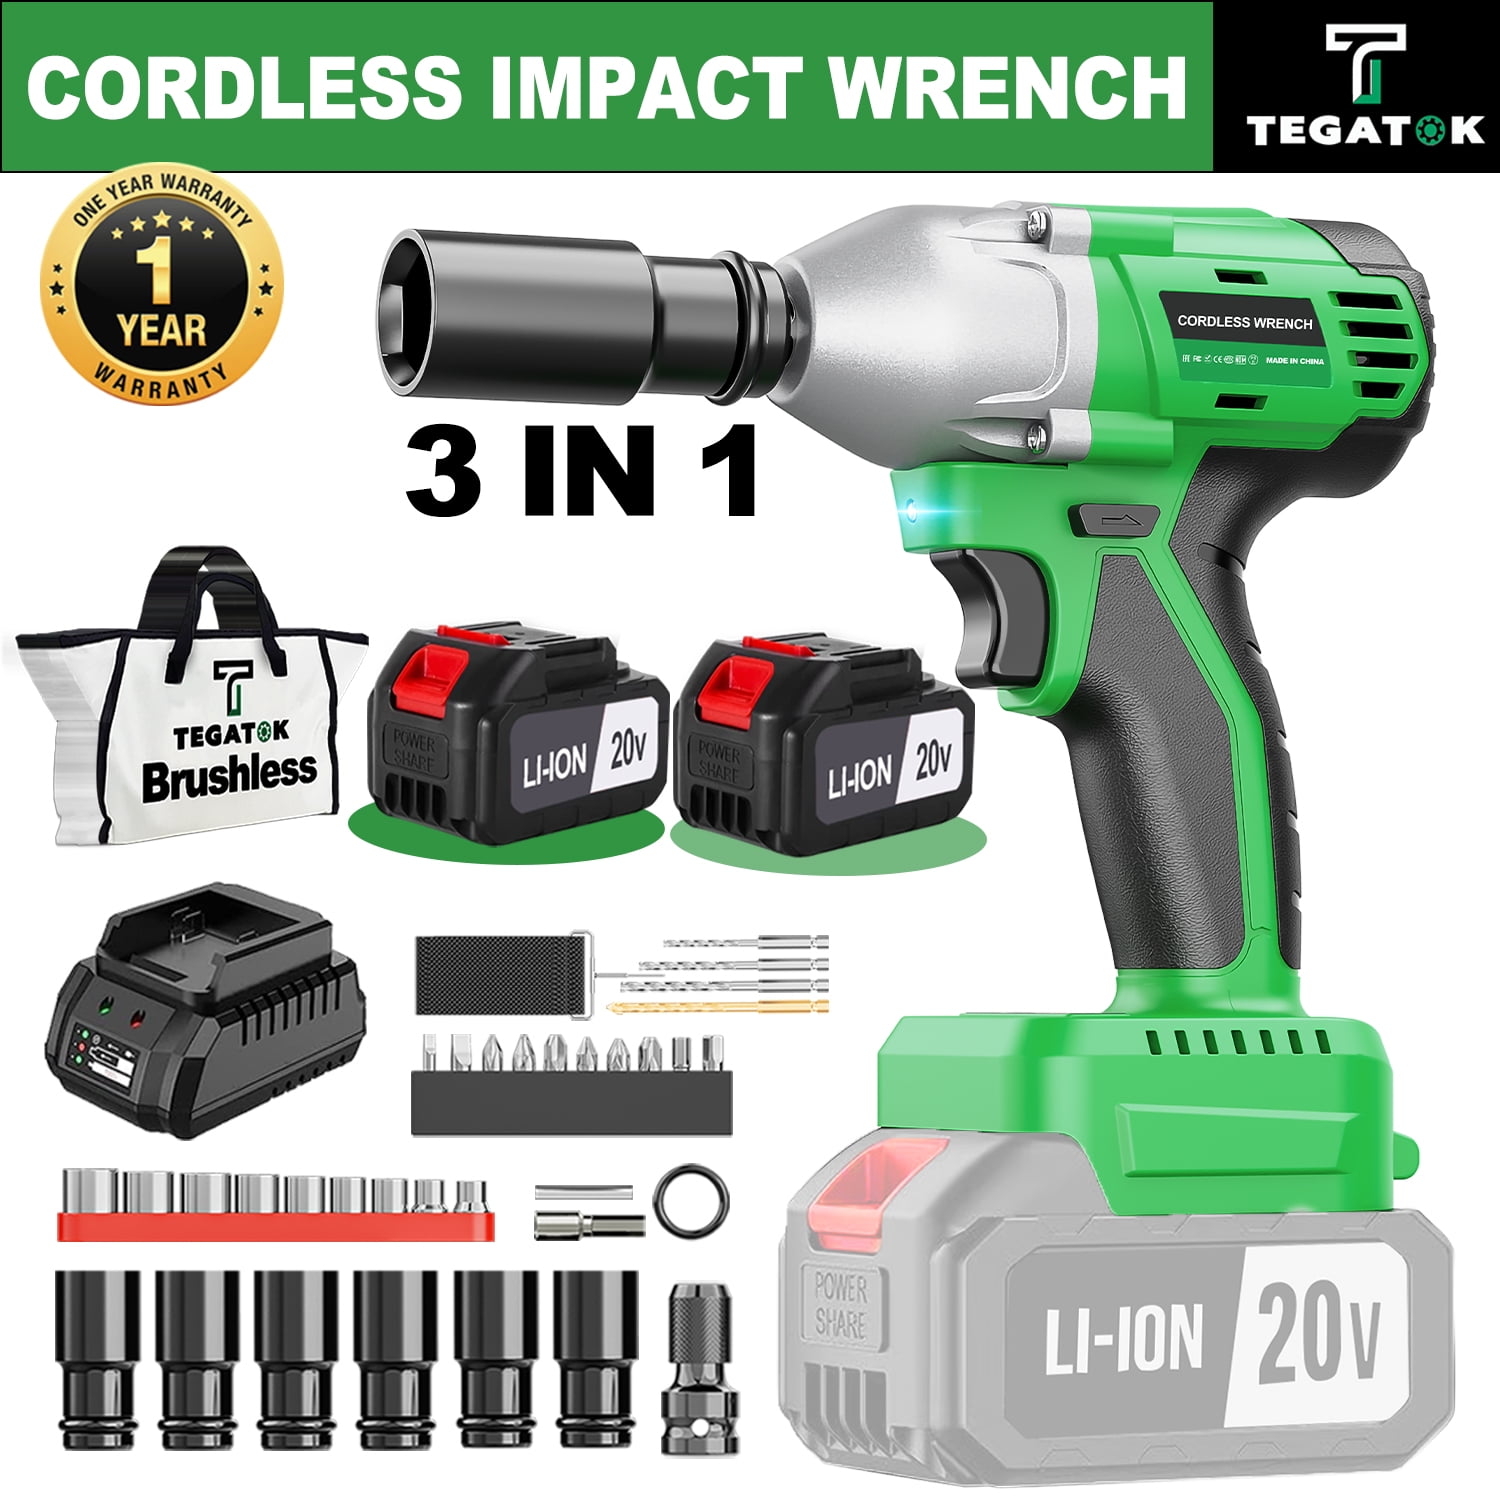 NEIKO 10878A 20V 1/2 Cordless Impact Wrench 1/2-Inch Chuck with